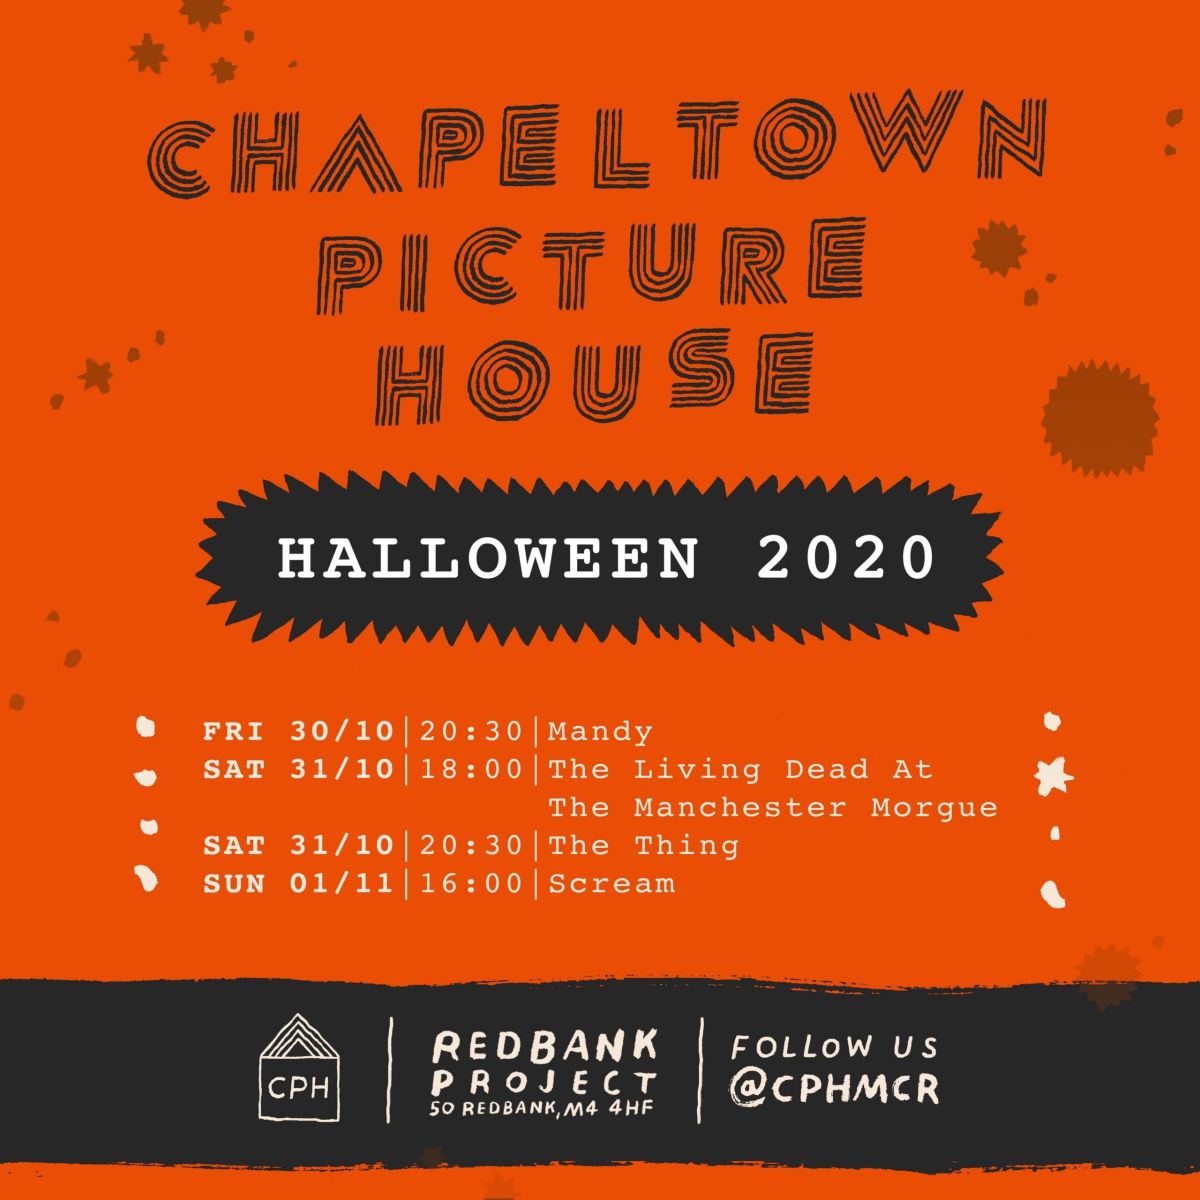 Chapeltown Picture House presents cult curation this Halloween